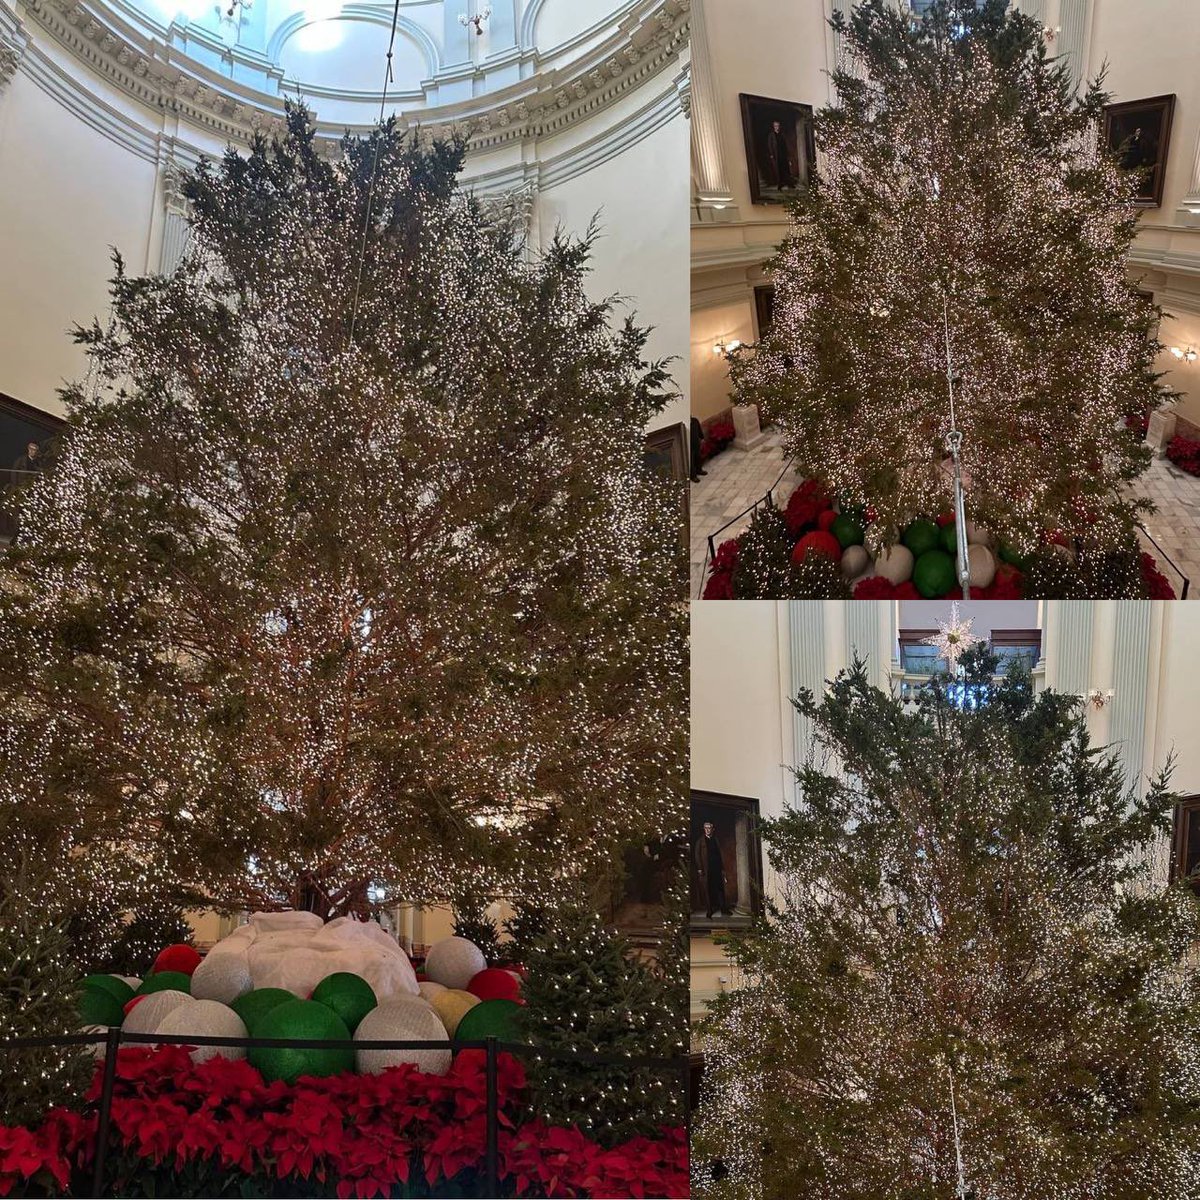 This beautiful tree is in the Georgia Capitol, and I am proud to say comes from the Ringgold area, which is in my district, Georgia 14.